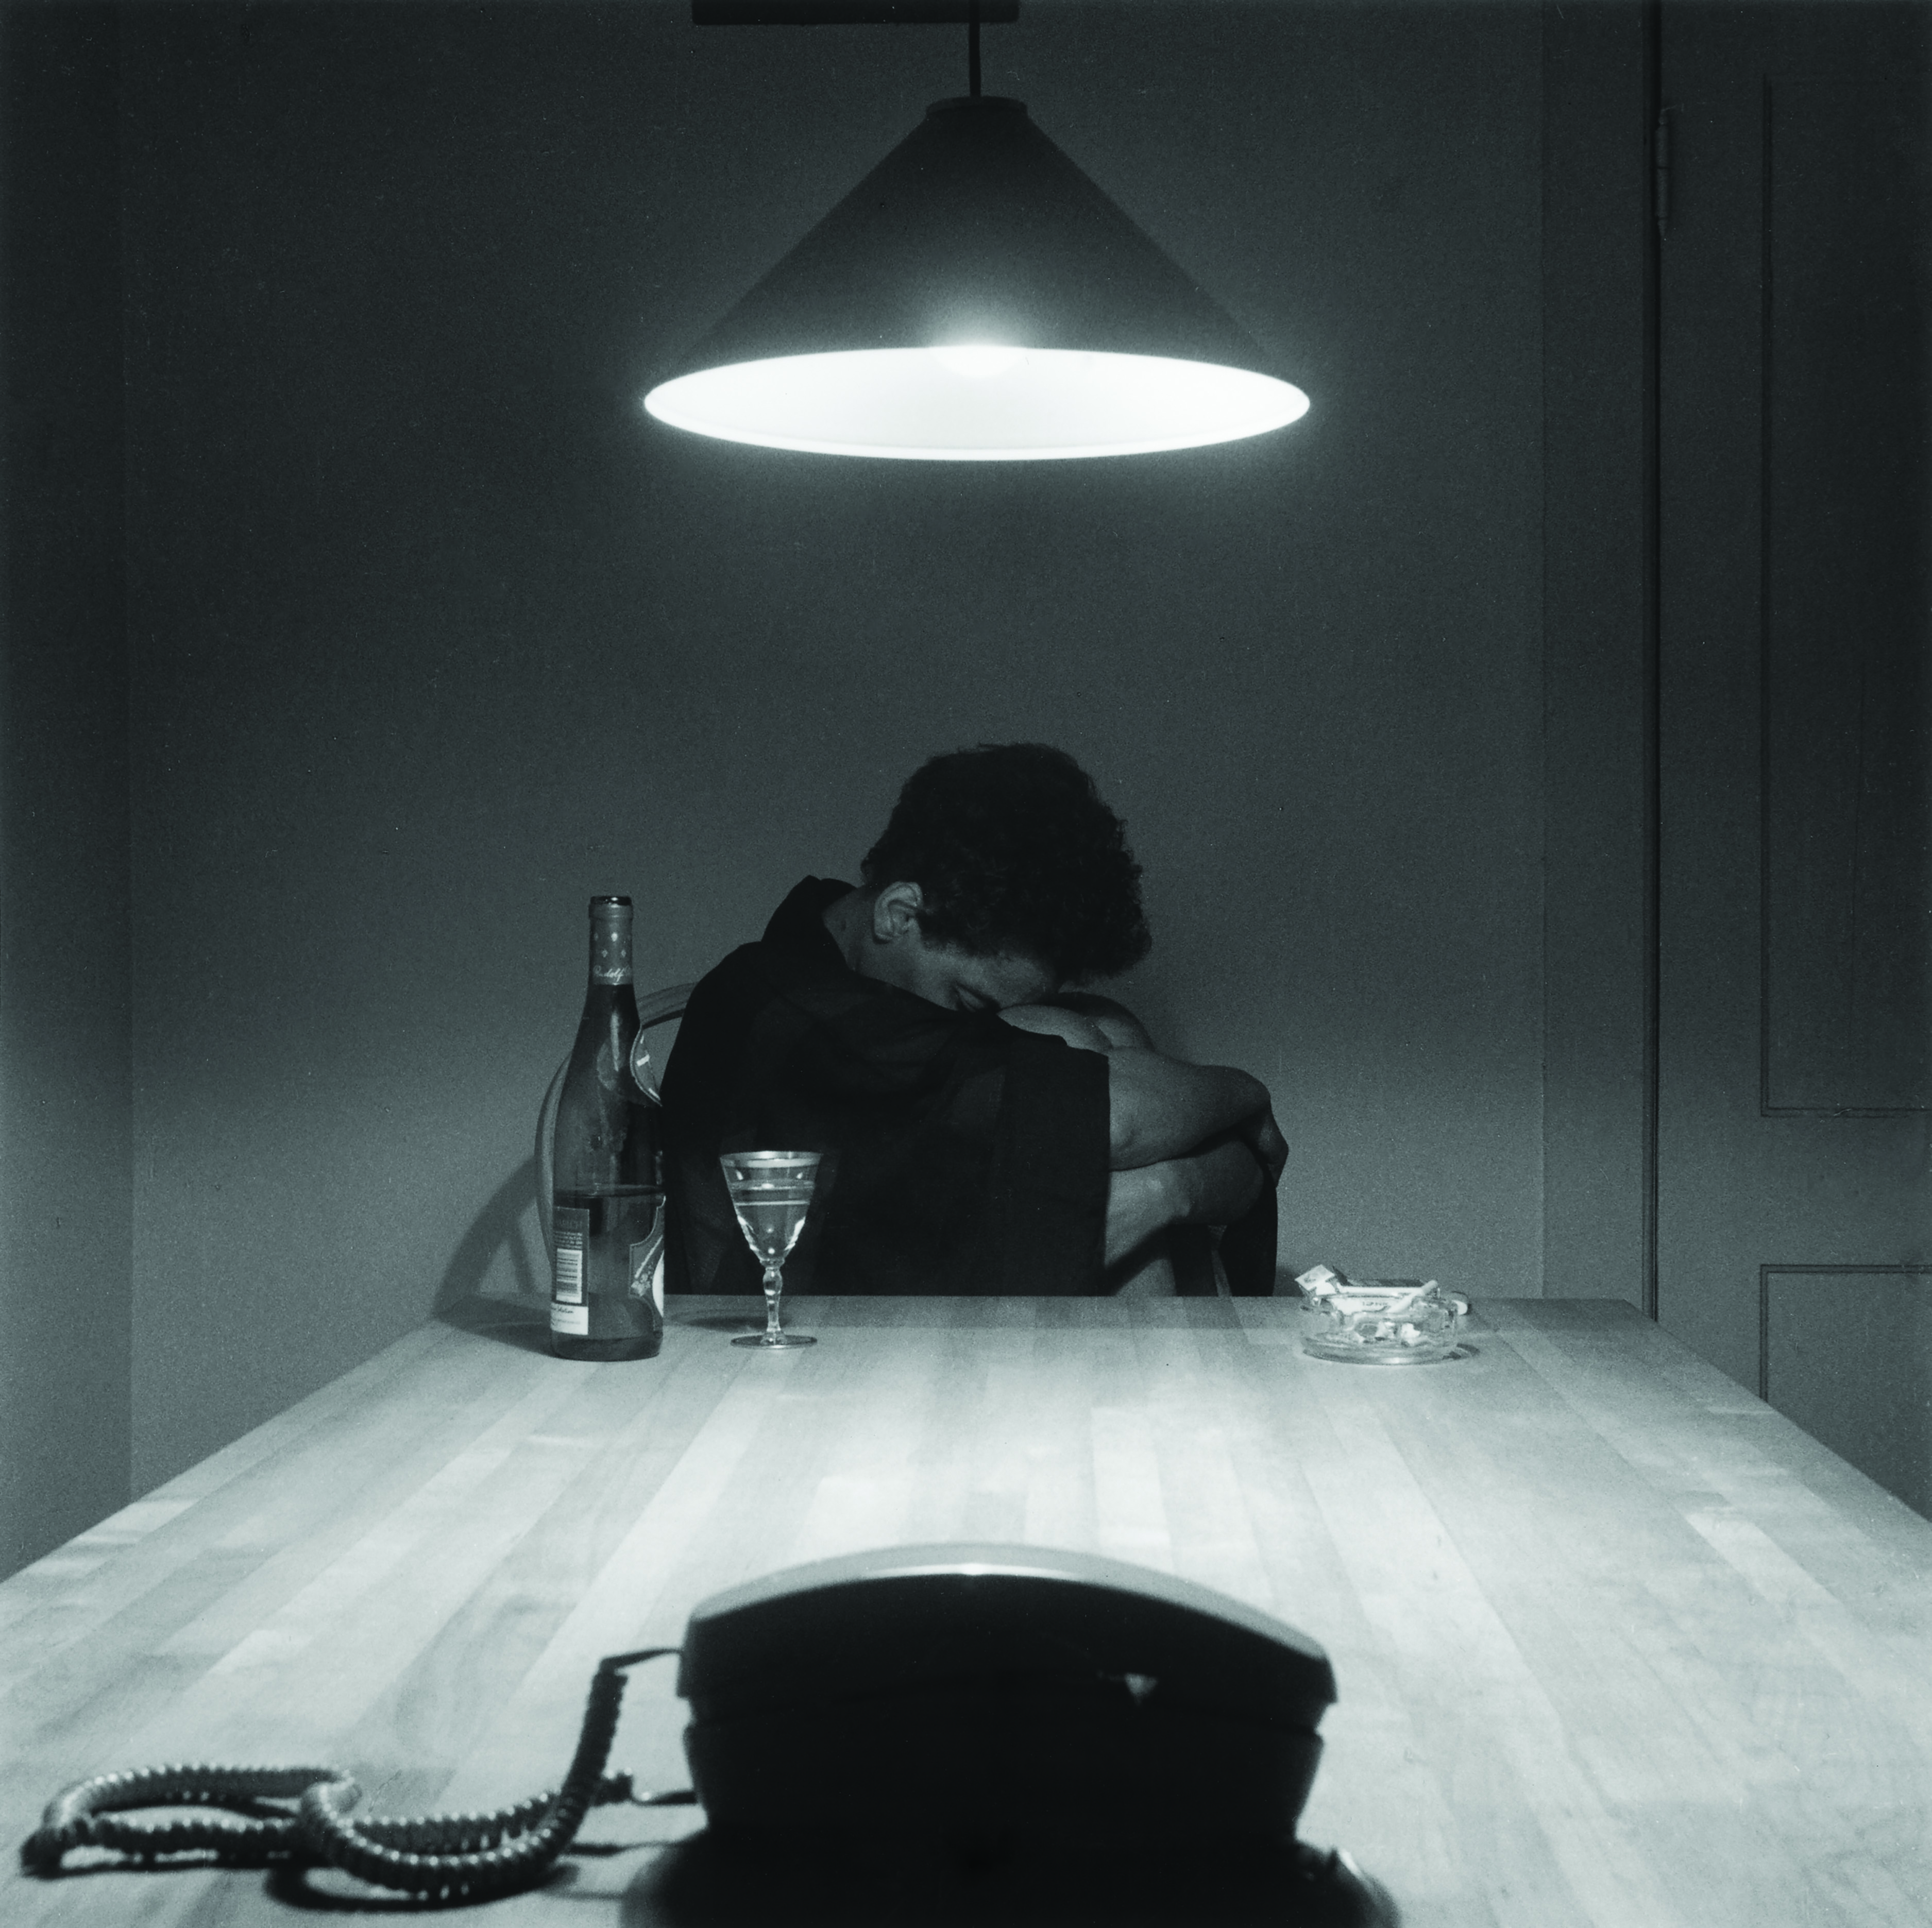 The artist appears in her <em>Untitled (Woman and Phone),</em>1990, part of her career-making <em>Kitchen Table Series</em>.